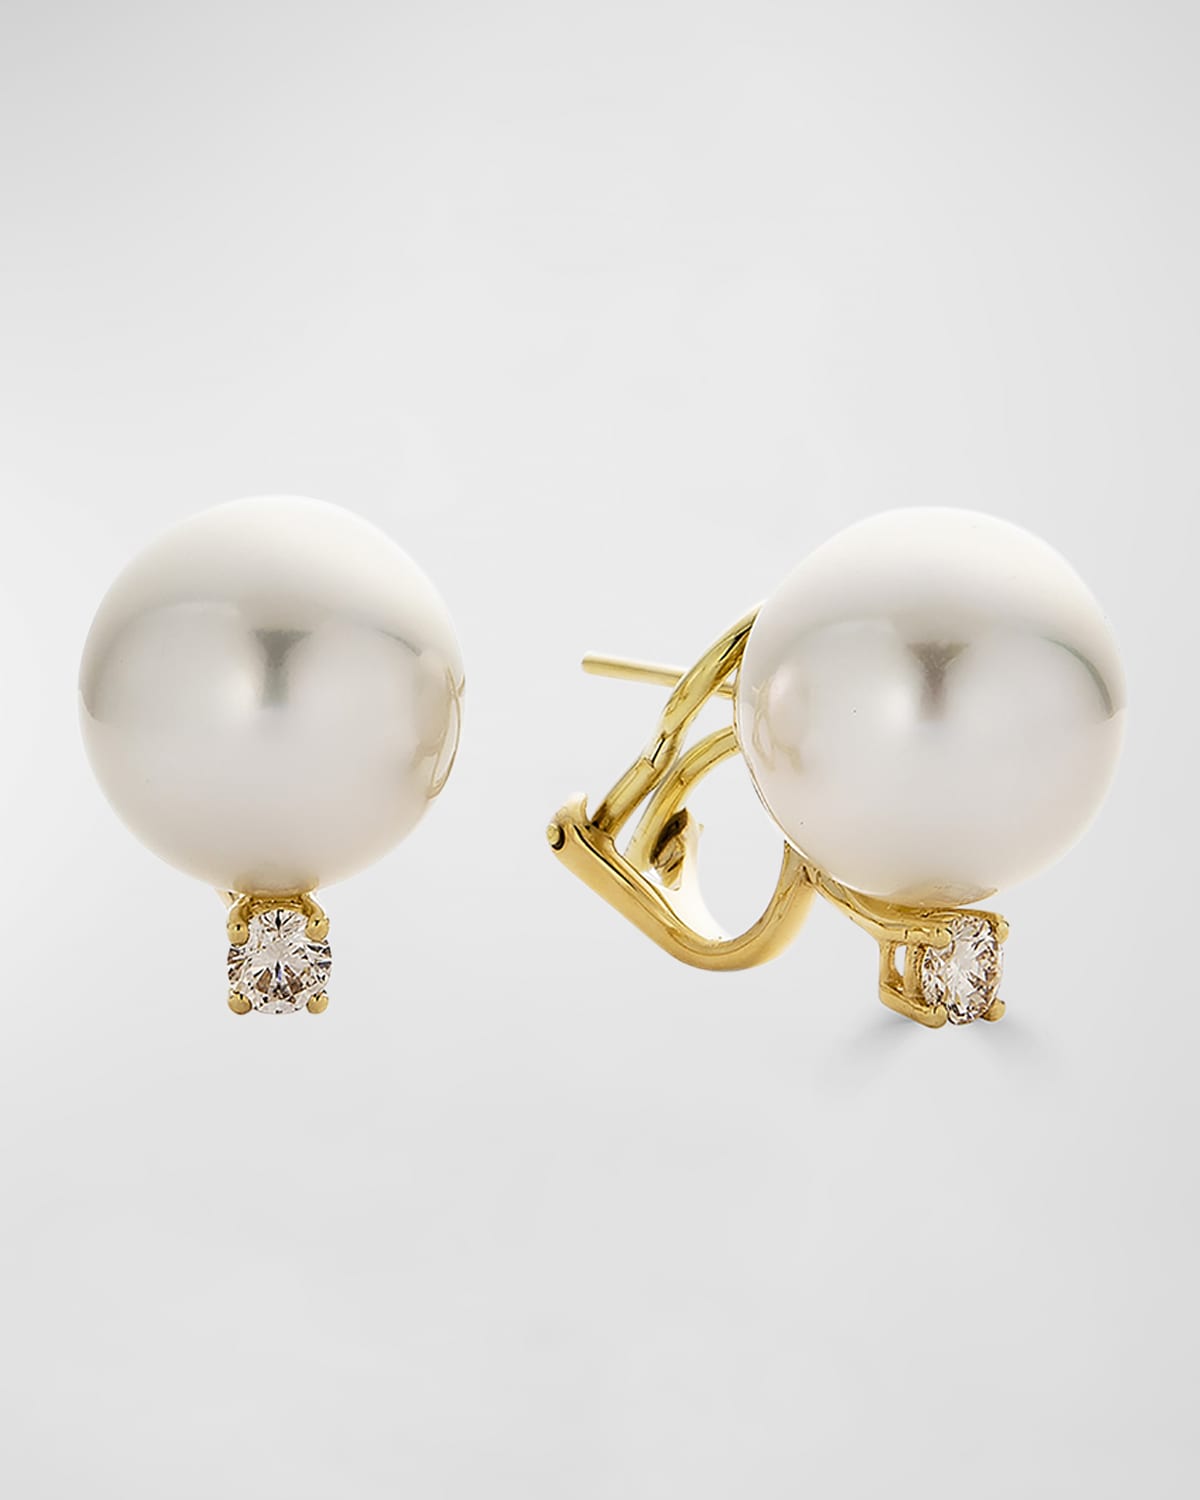 18K Yellow Gold 11mm South Sea Pearl and Diamond Earrings